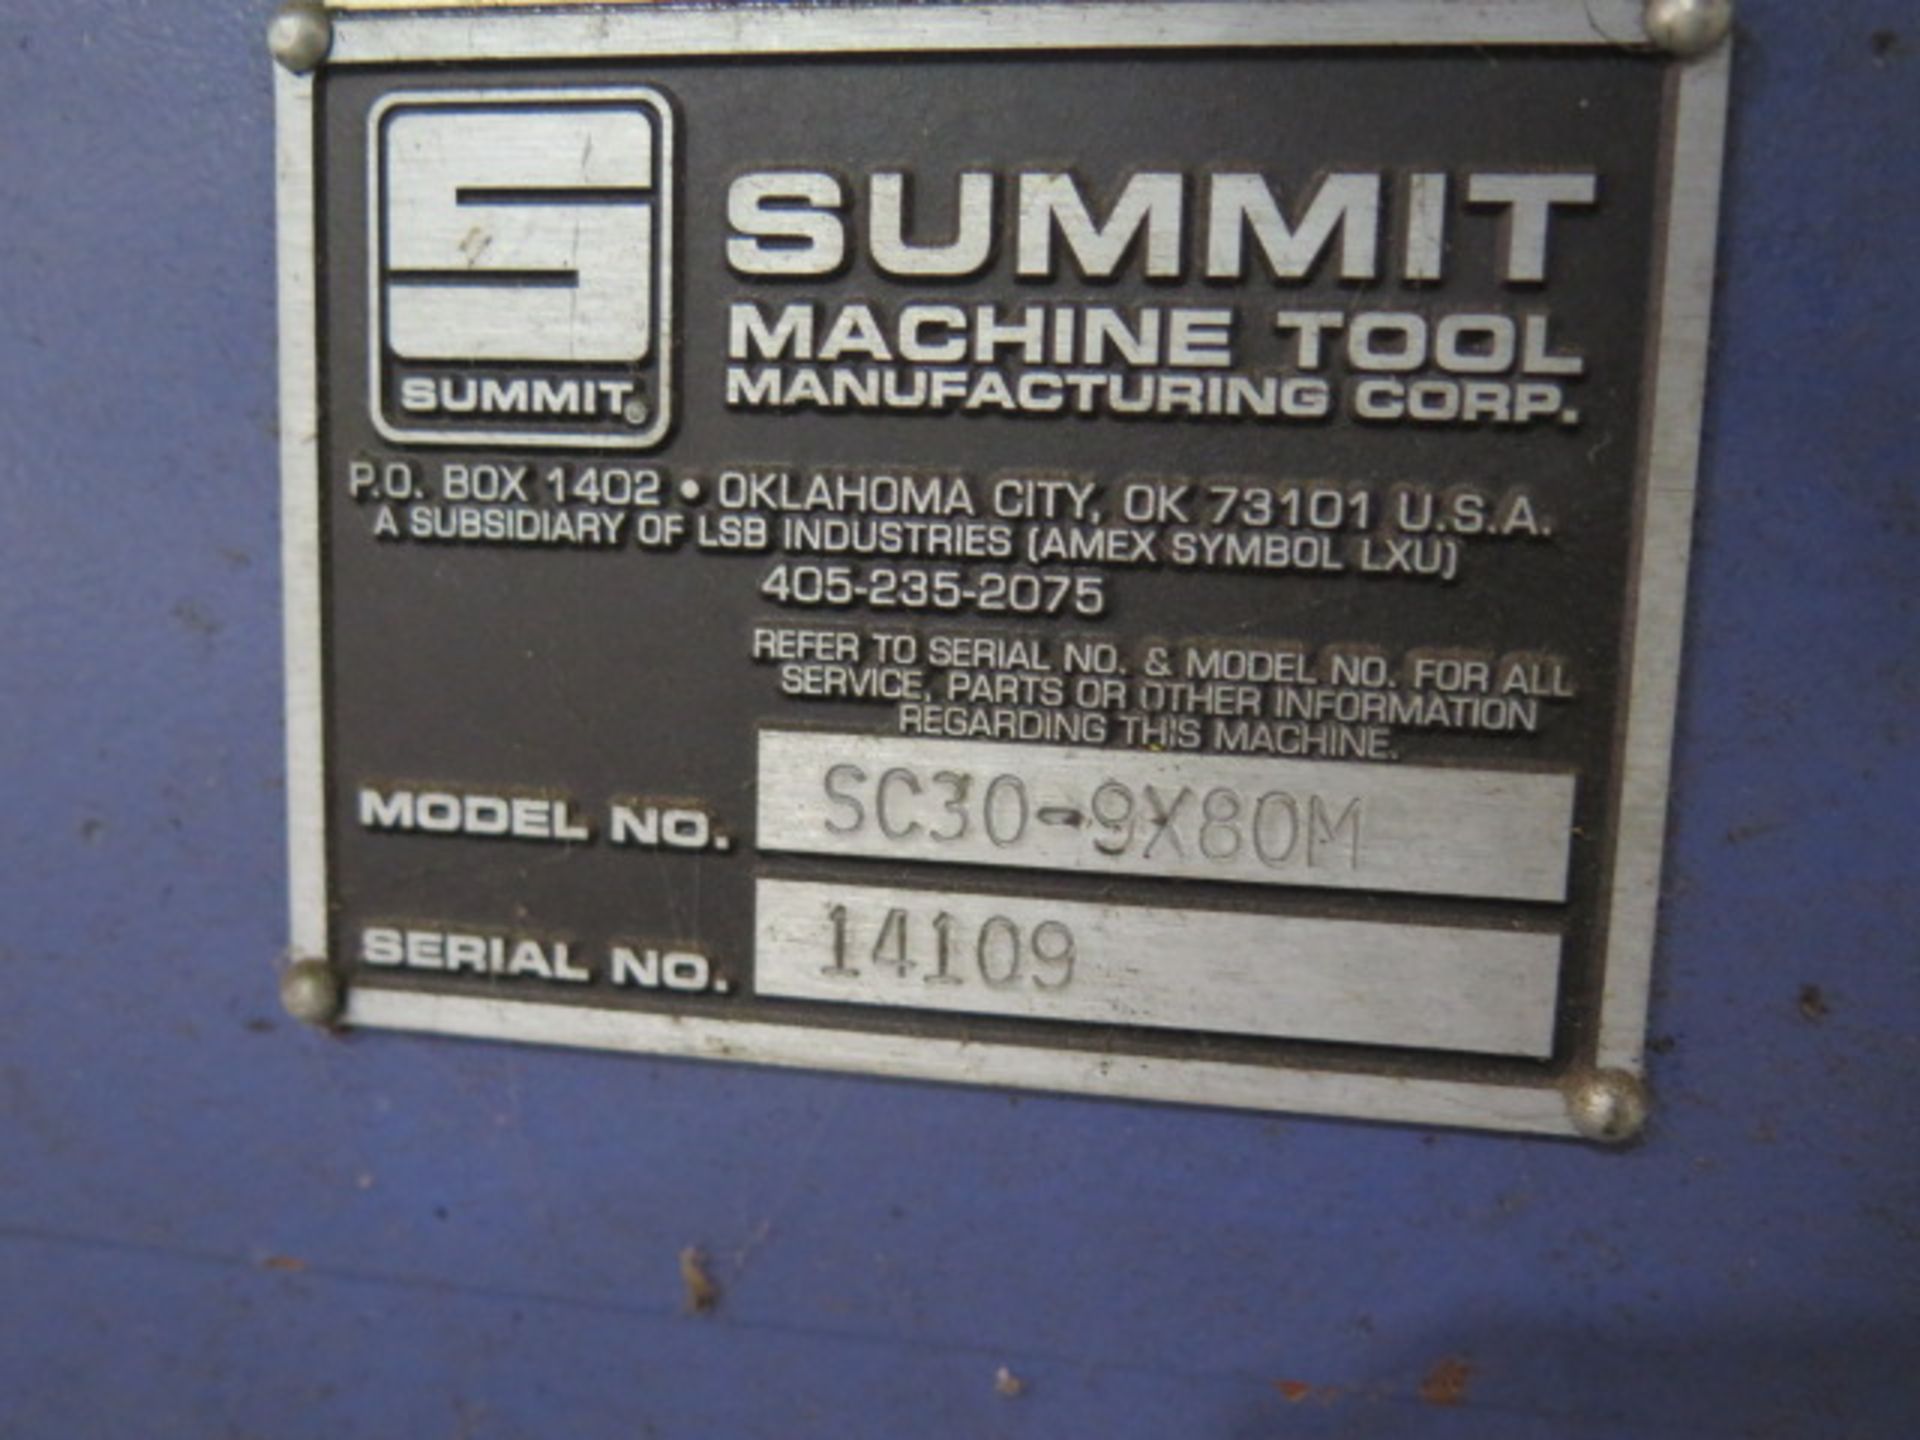 Summit “Smart Cut” SC30-9X80M Big Bore CNC Turning Center,Fagor Controls, 9” Spindle Bore,SOLD AS IS - Image 26 of 26